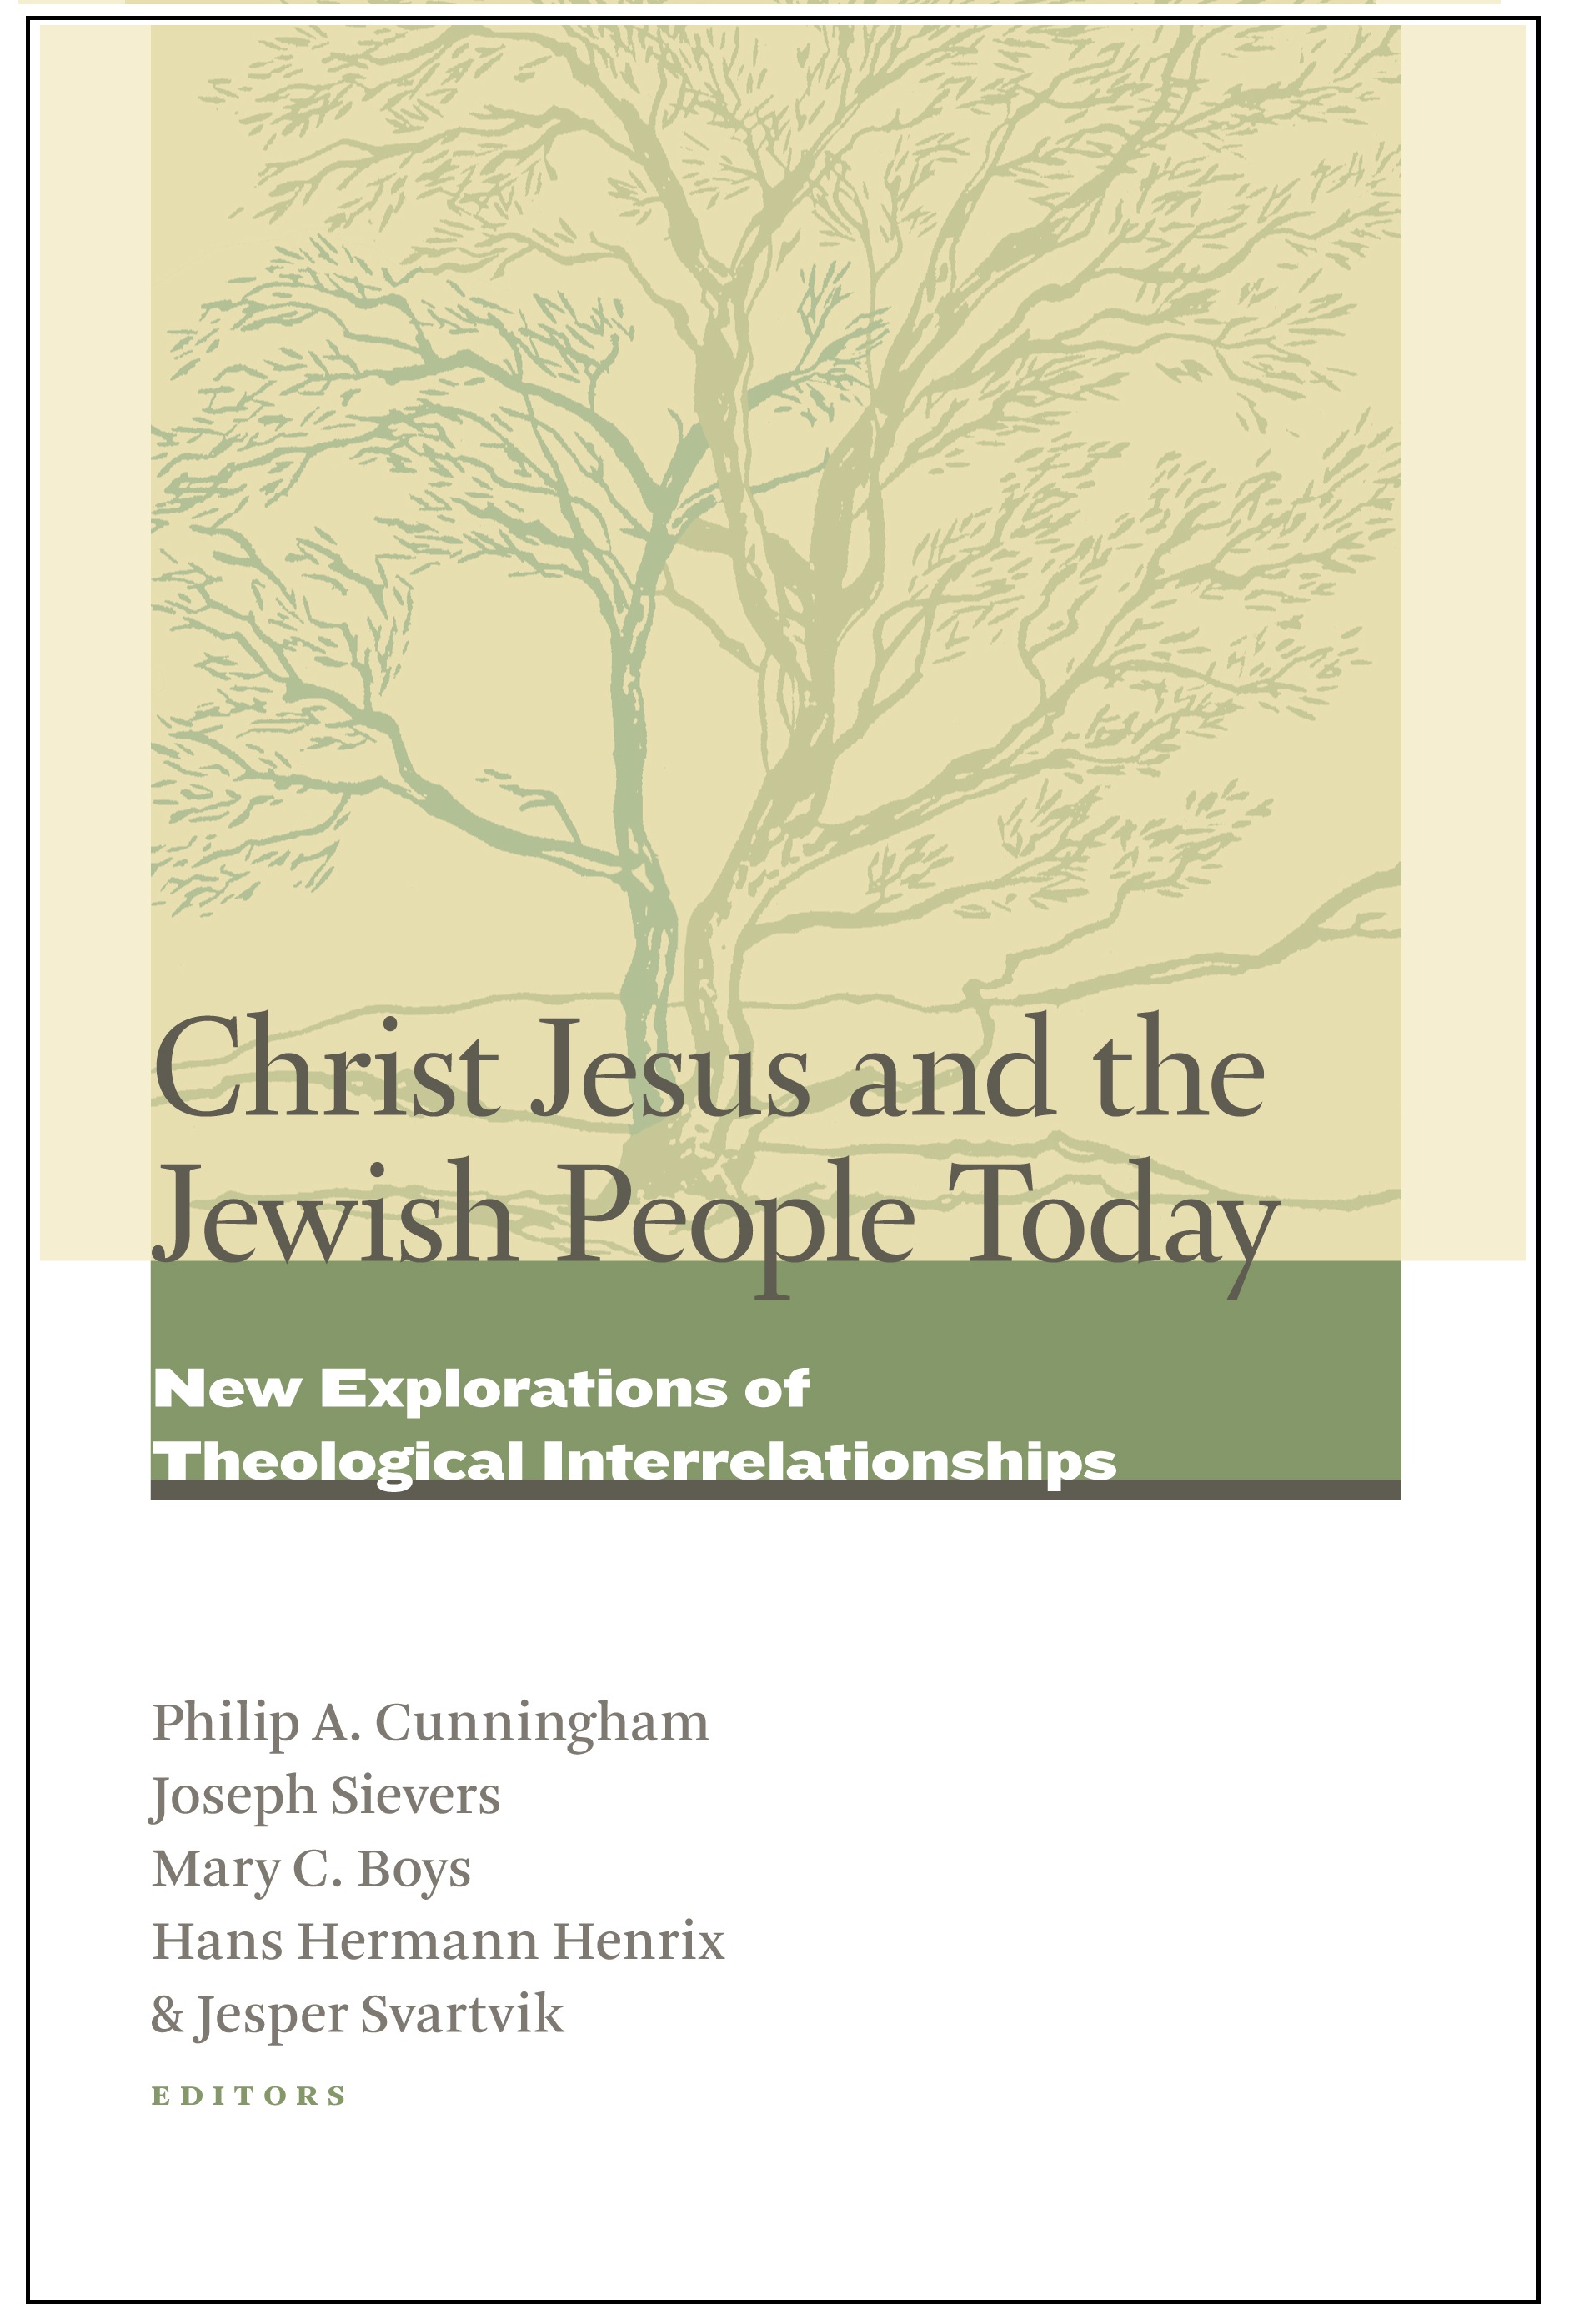 Christ Jesus and the Jewish People Today book cover